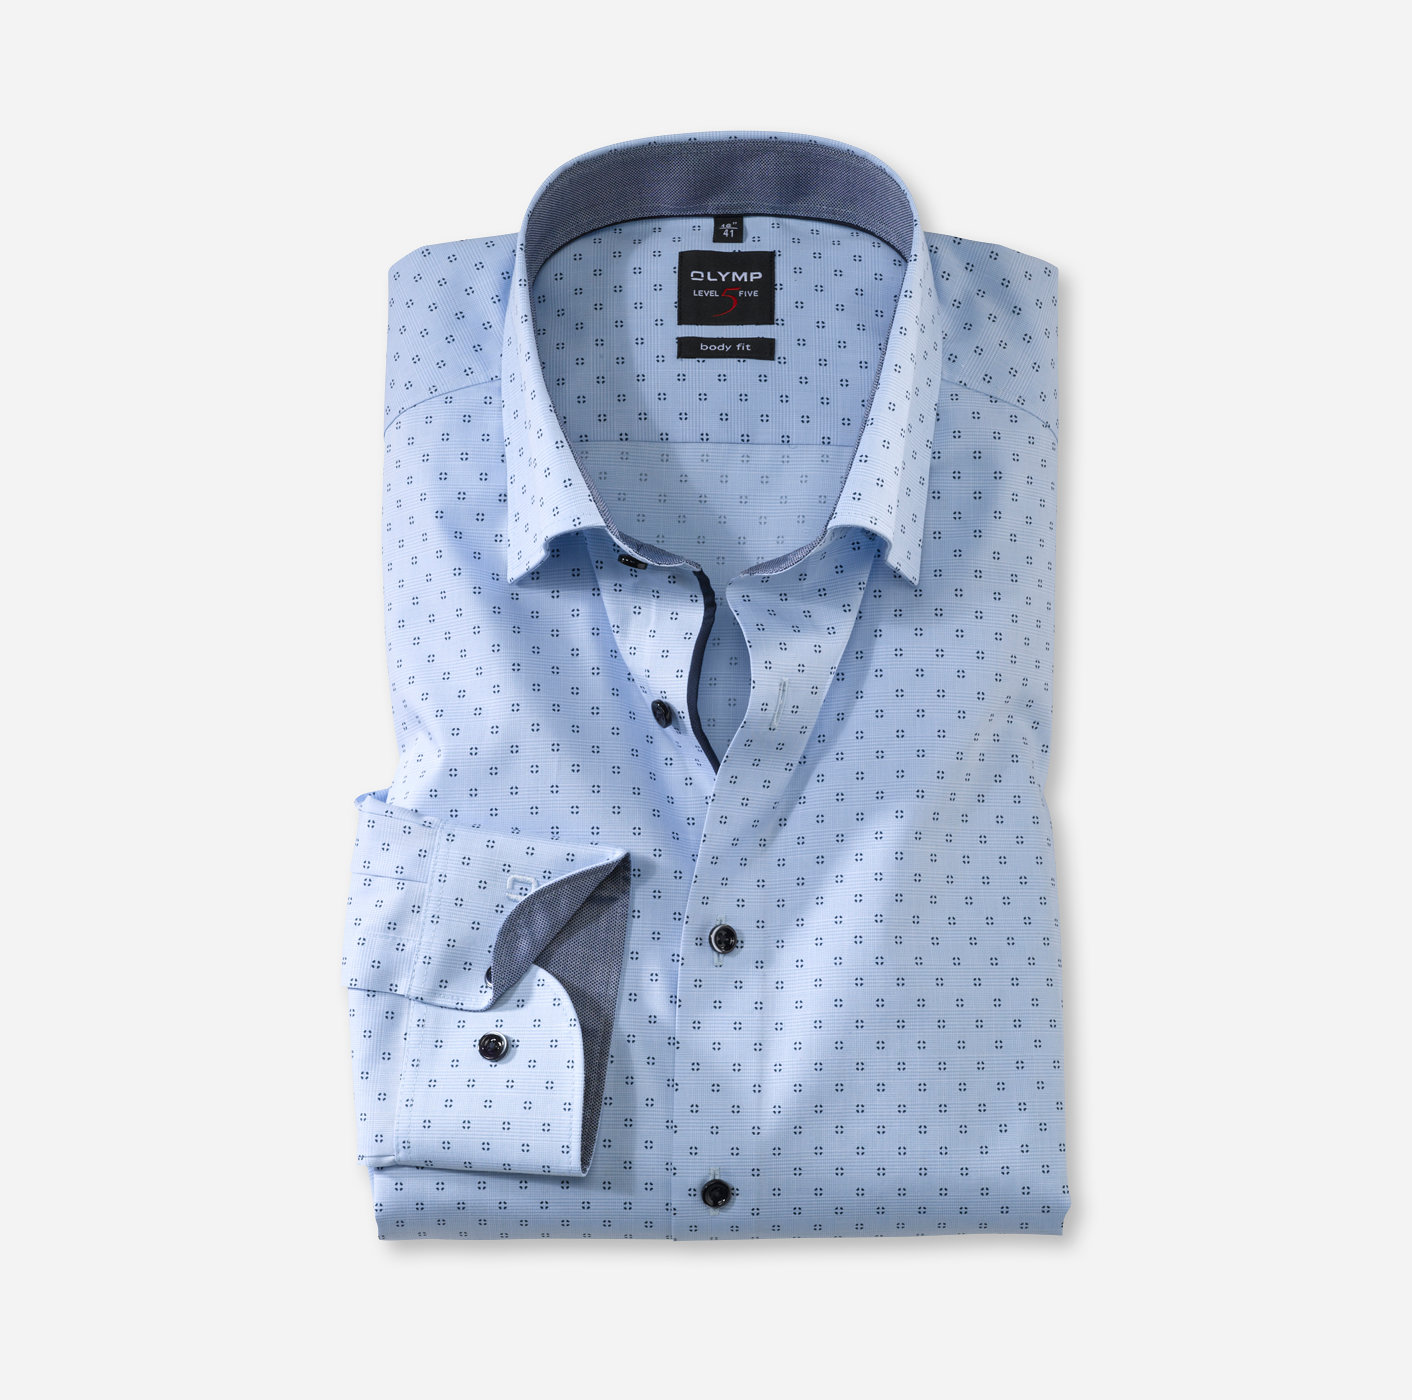 OLYMP Level Five, body fit, Businesshemd, Under-Button-down, Bleu